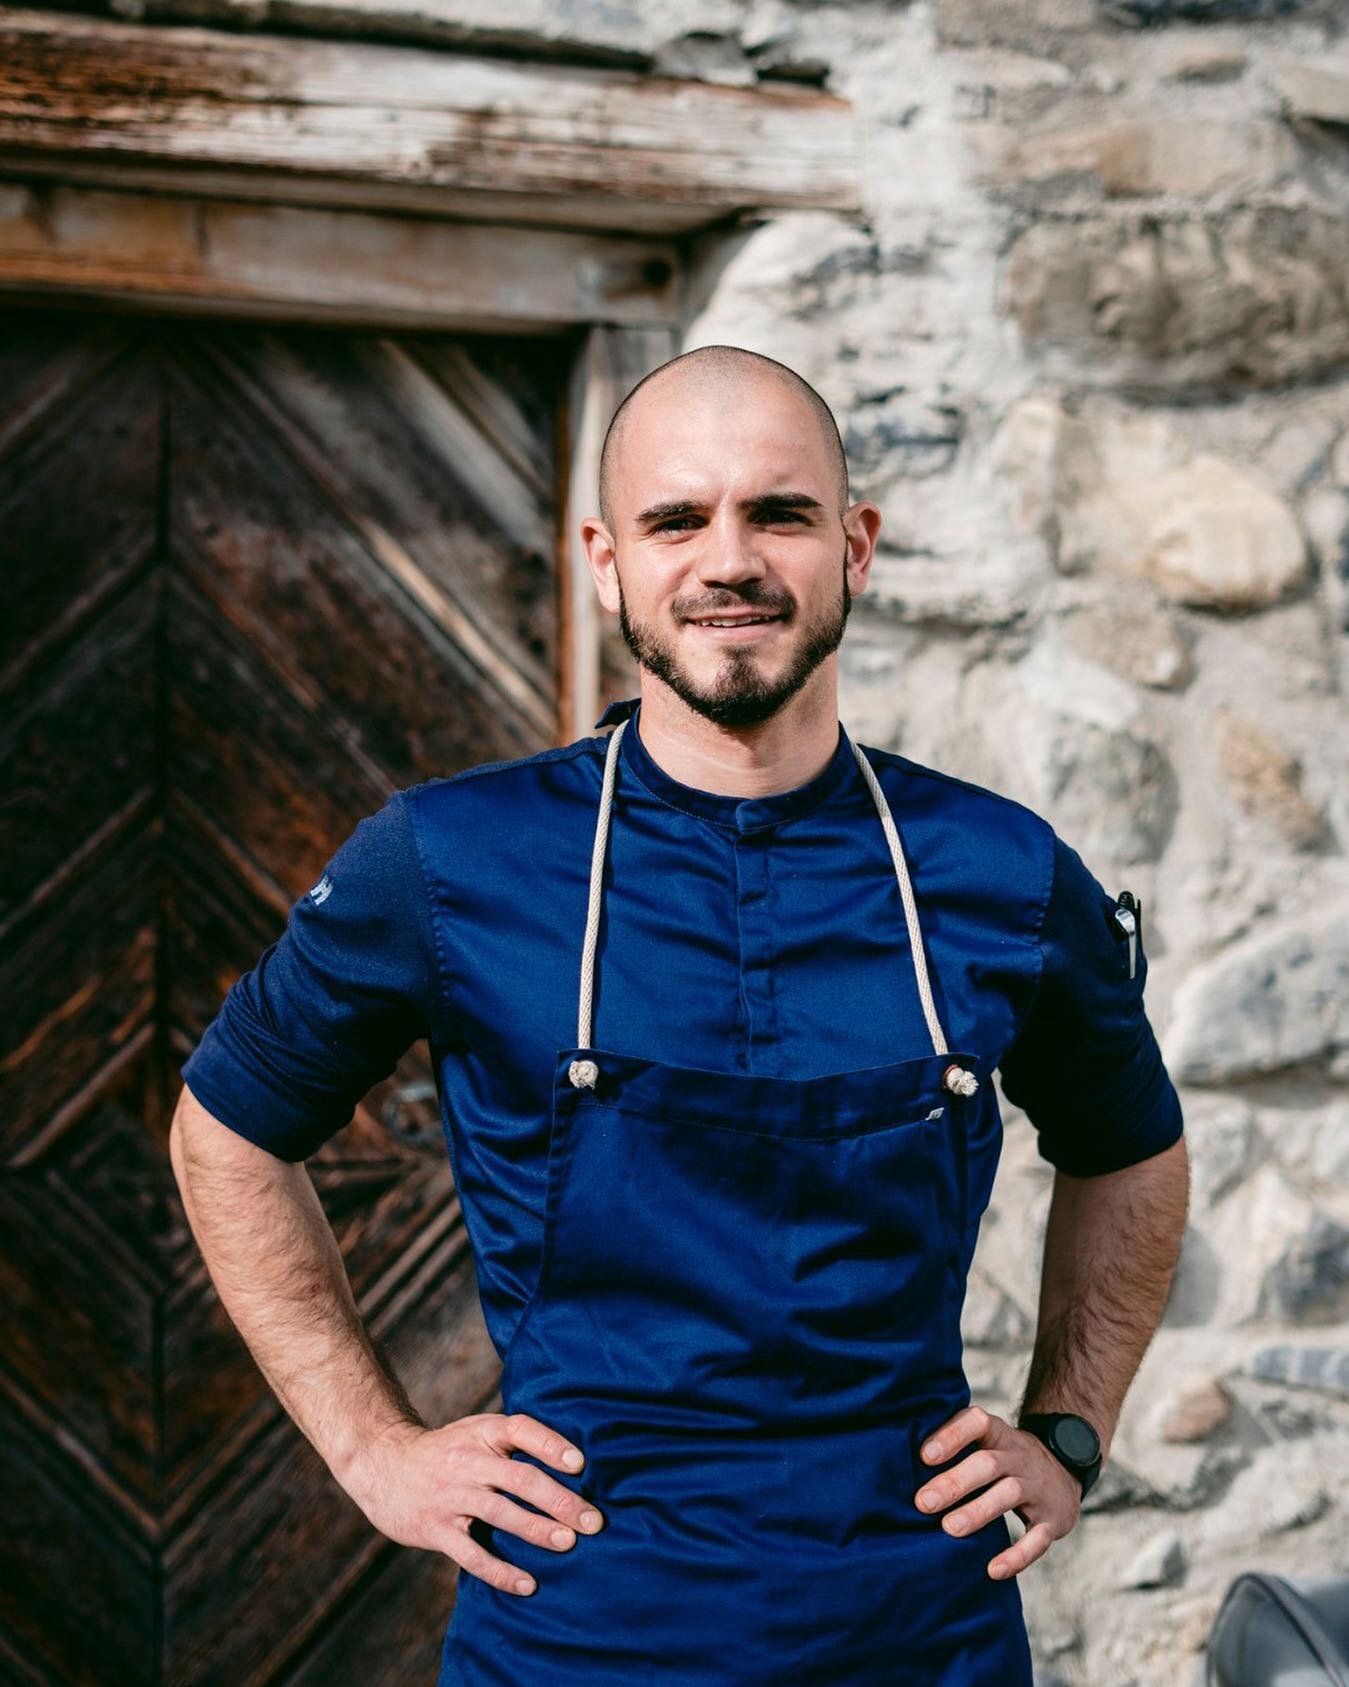 We are proud to introduce our head chef Simeon Nikolov! From California to London and Copenhagen, his culinary journey brought him to join our team at @igniv.badragaz and @mammertsberg. Now, he is looking forward to welcoming you to Oz. 

Join us for